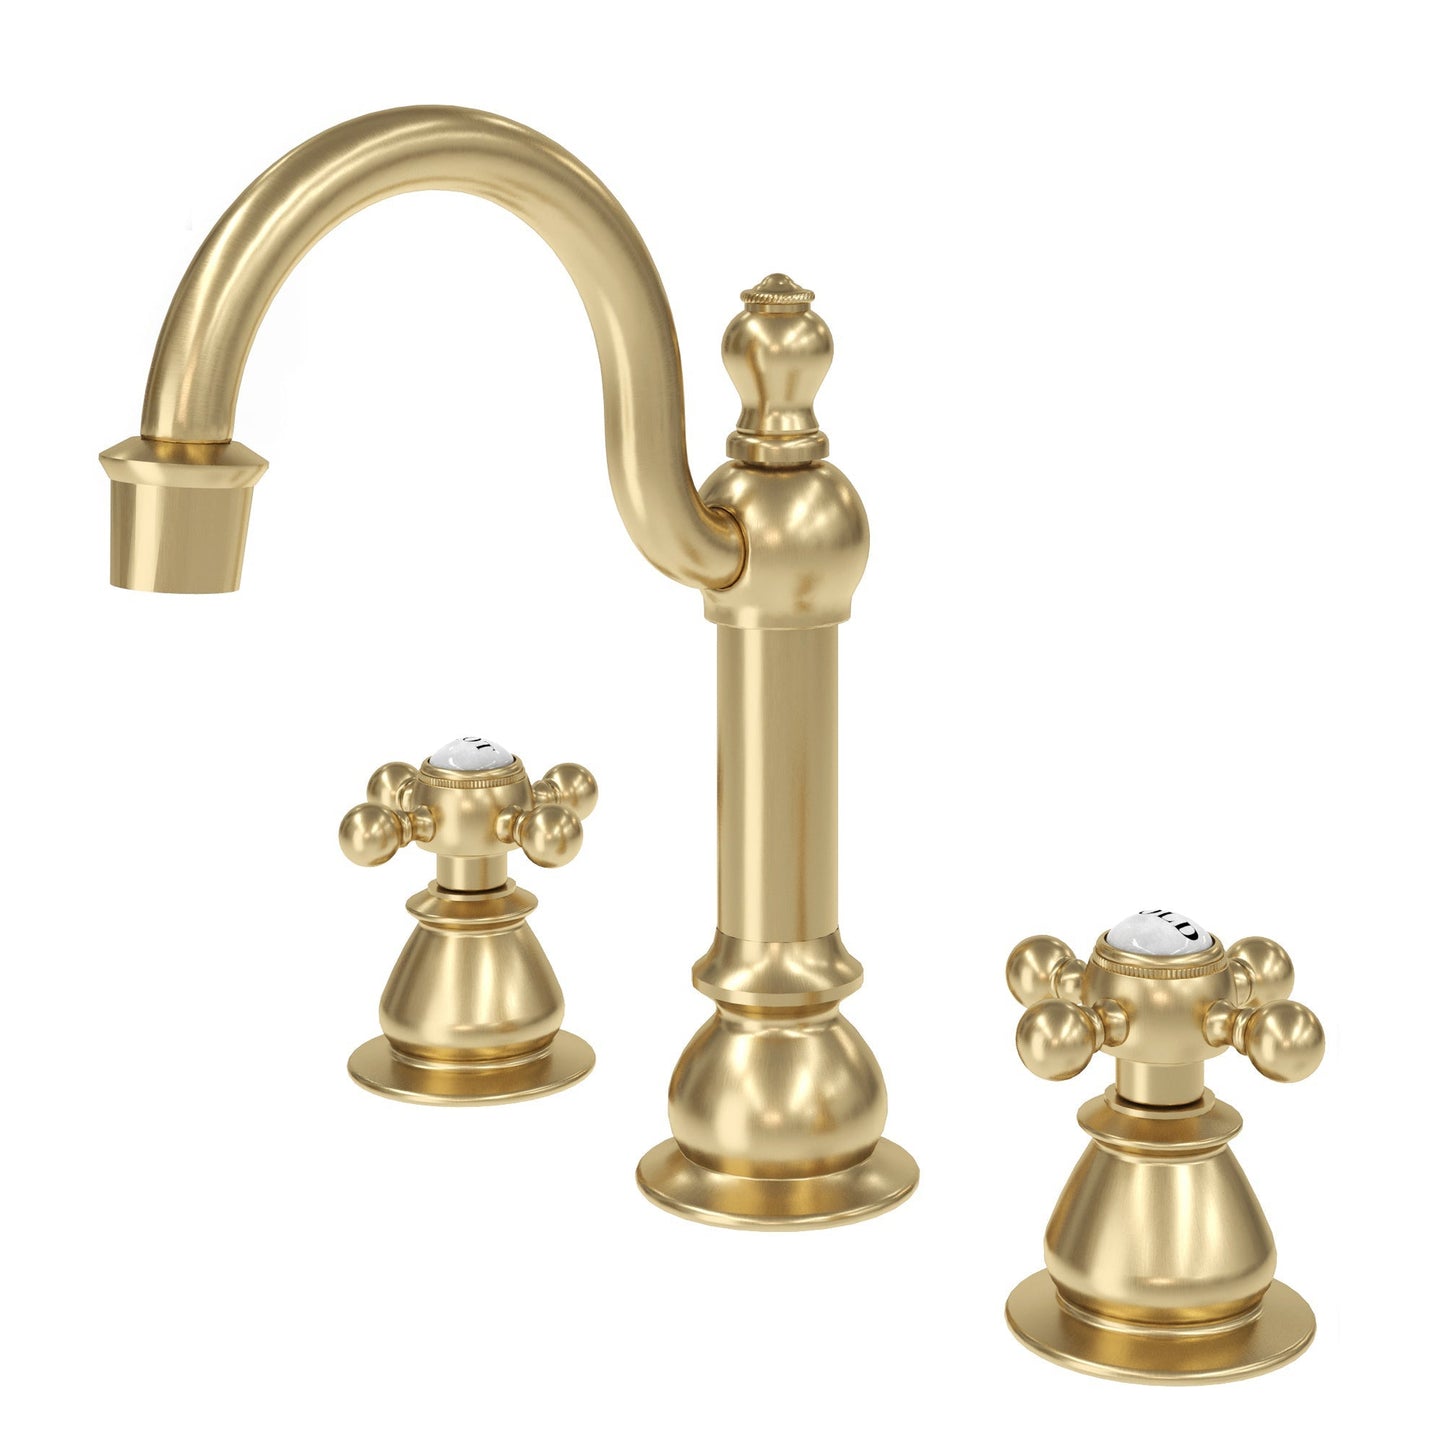 Water Creation American 20th Century Classic Widespread Lavatory F2-0012 8" Gold Solid Brass Faucet With Pop-Up Drain And Metal Lever Handles, Hot And Cold Labels Included